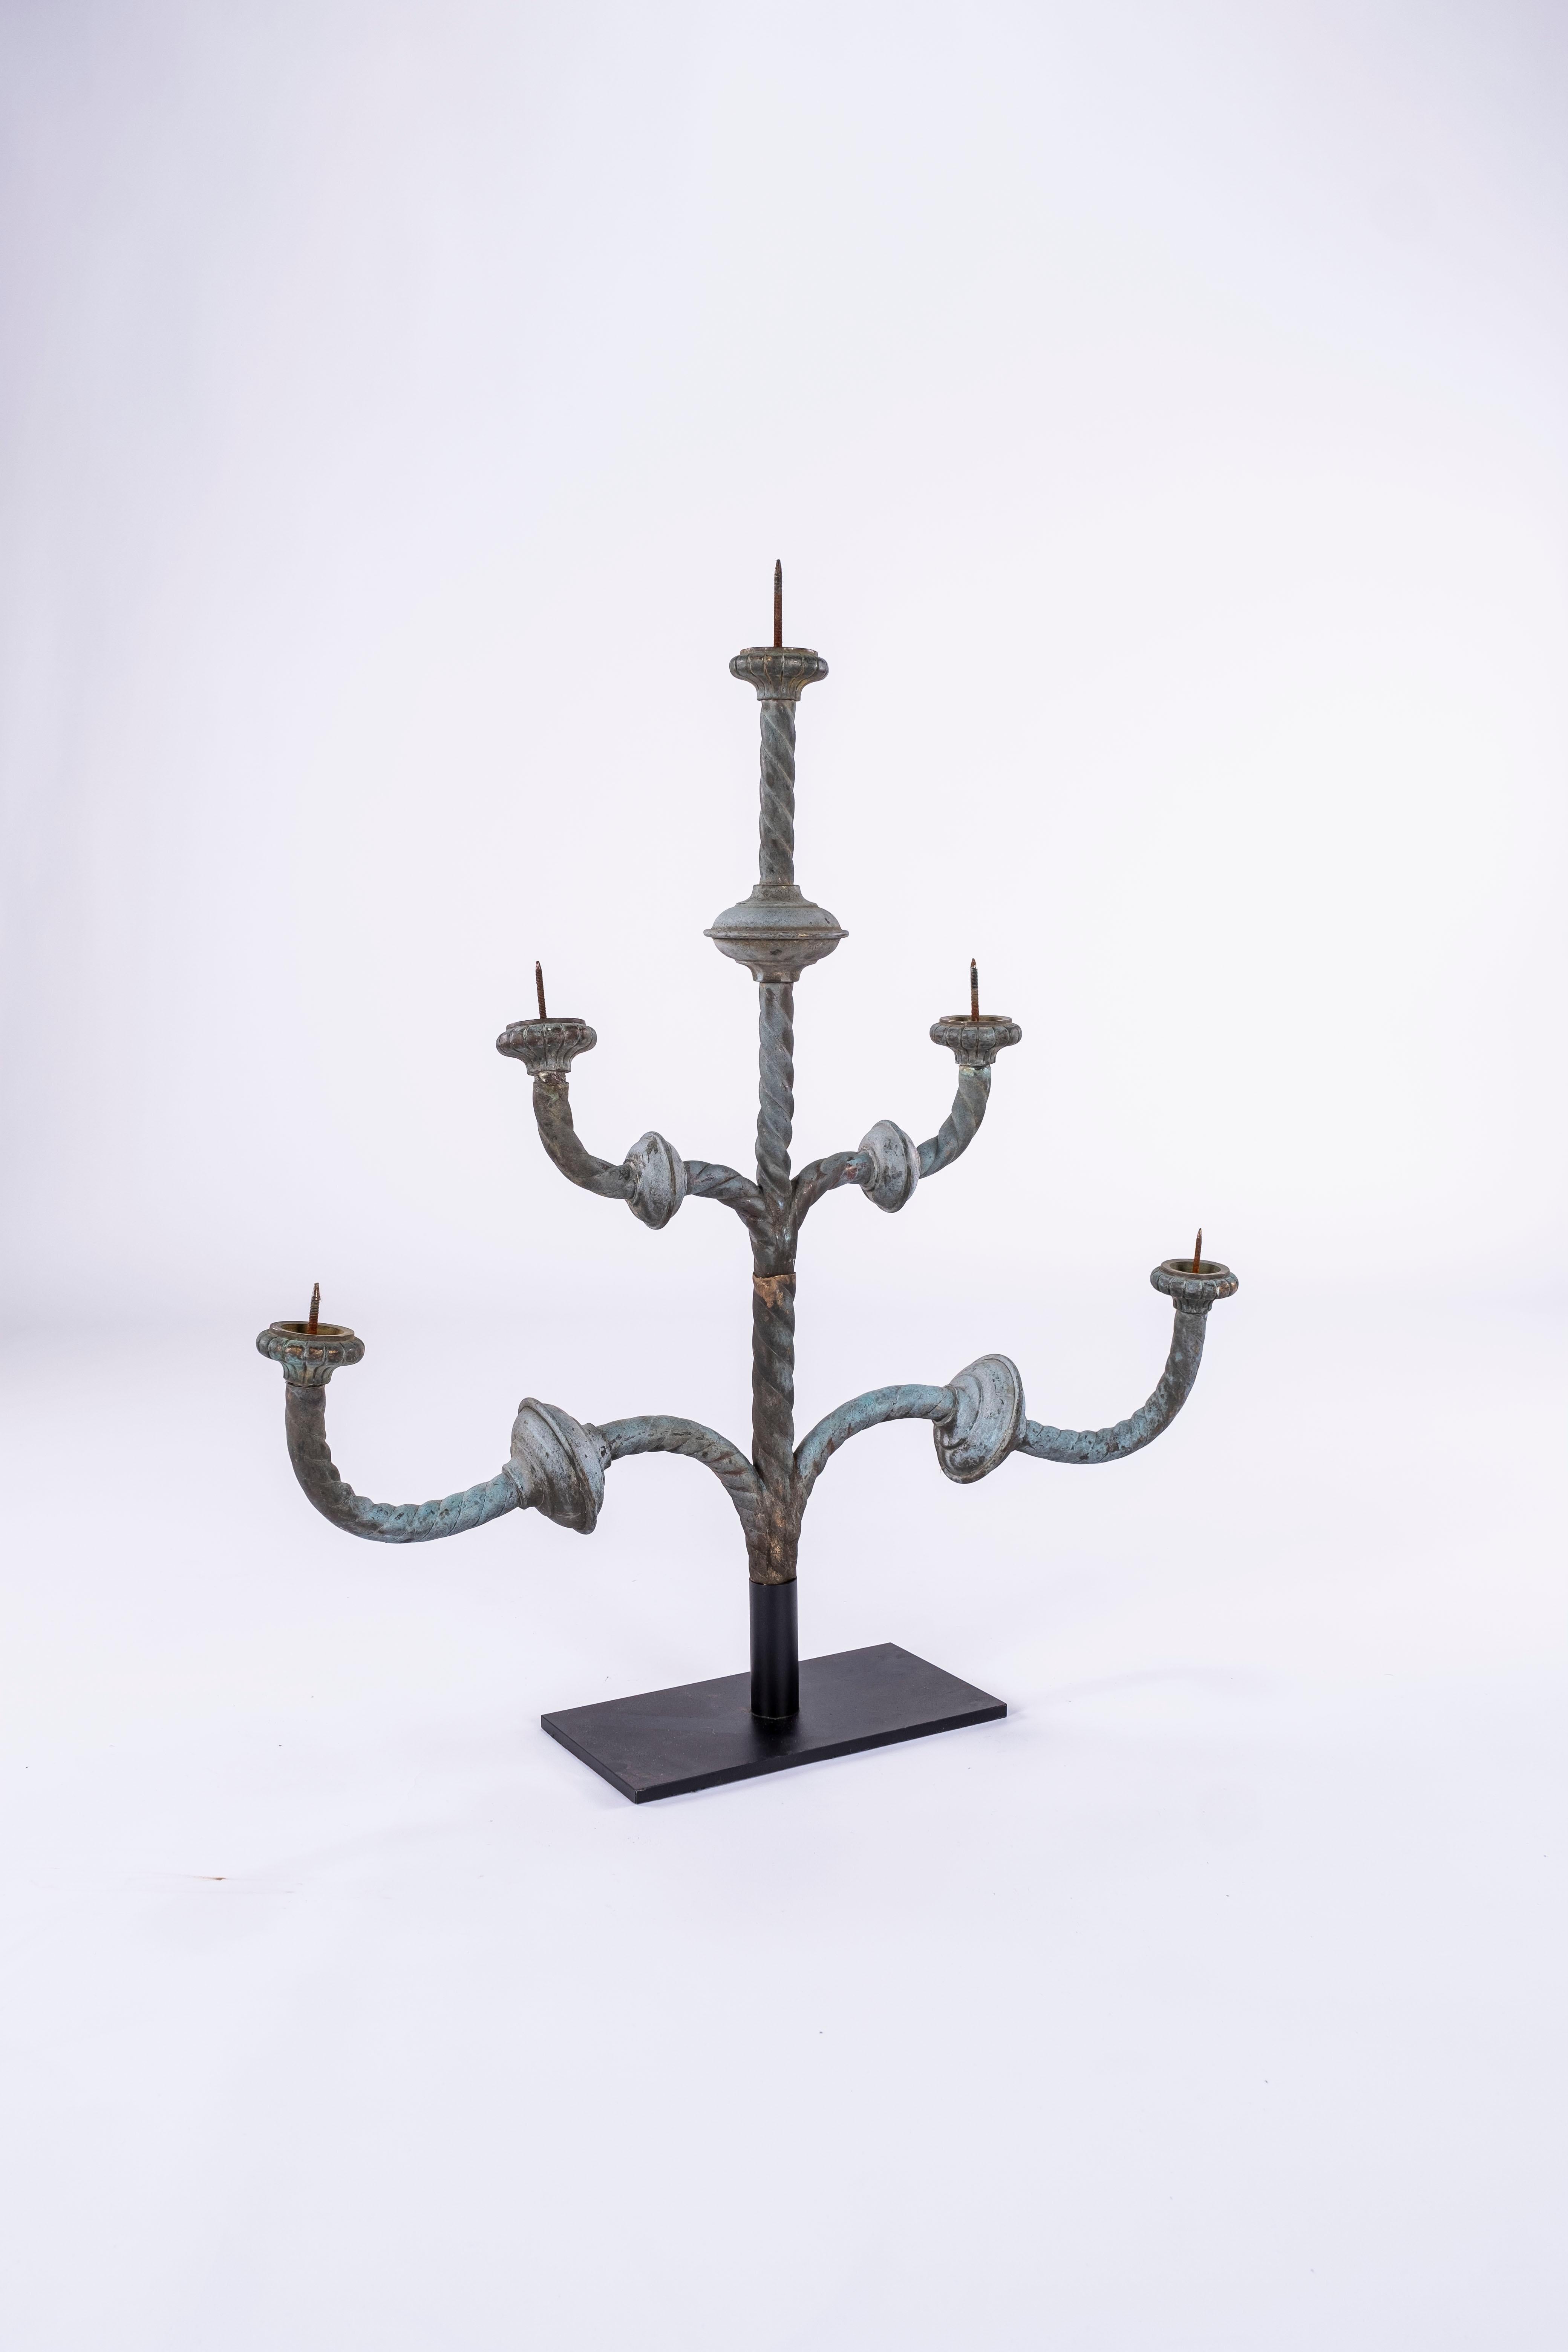 19th Century Zinc Candelabra with 5 candle arms.